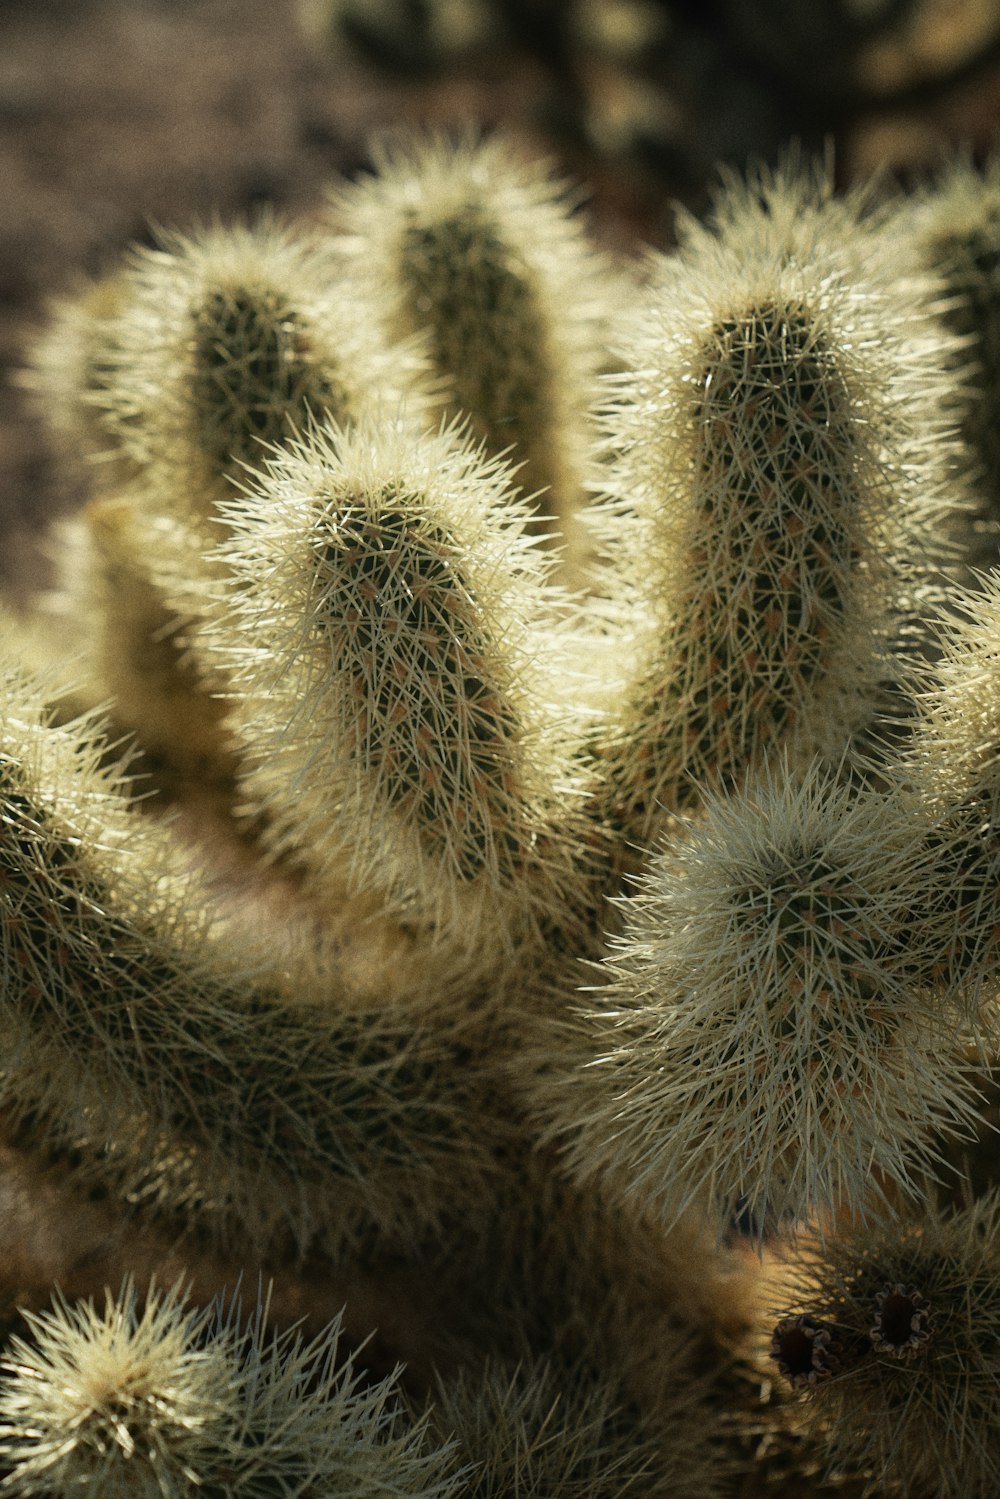 a close up of a small cactus plant